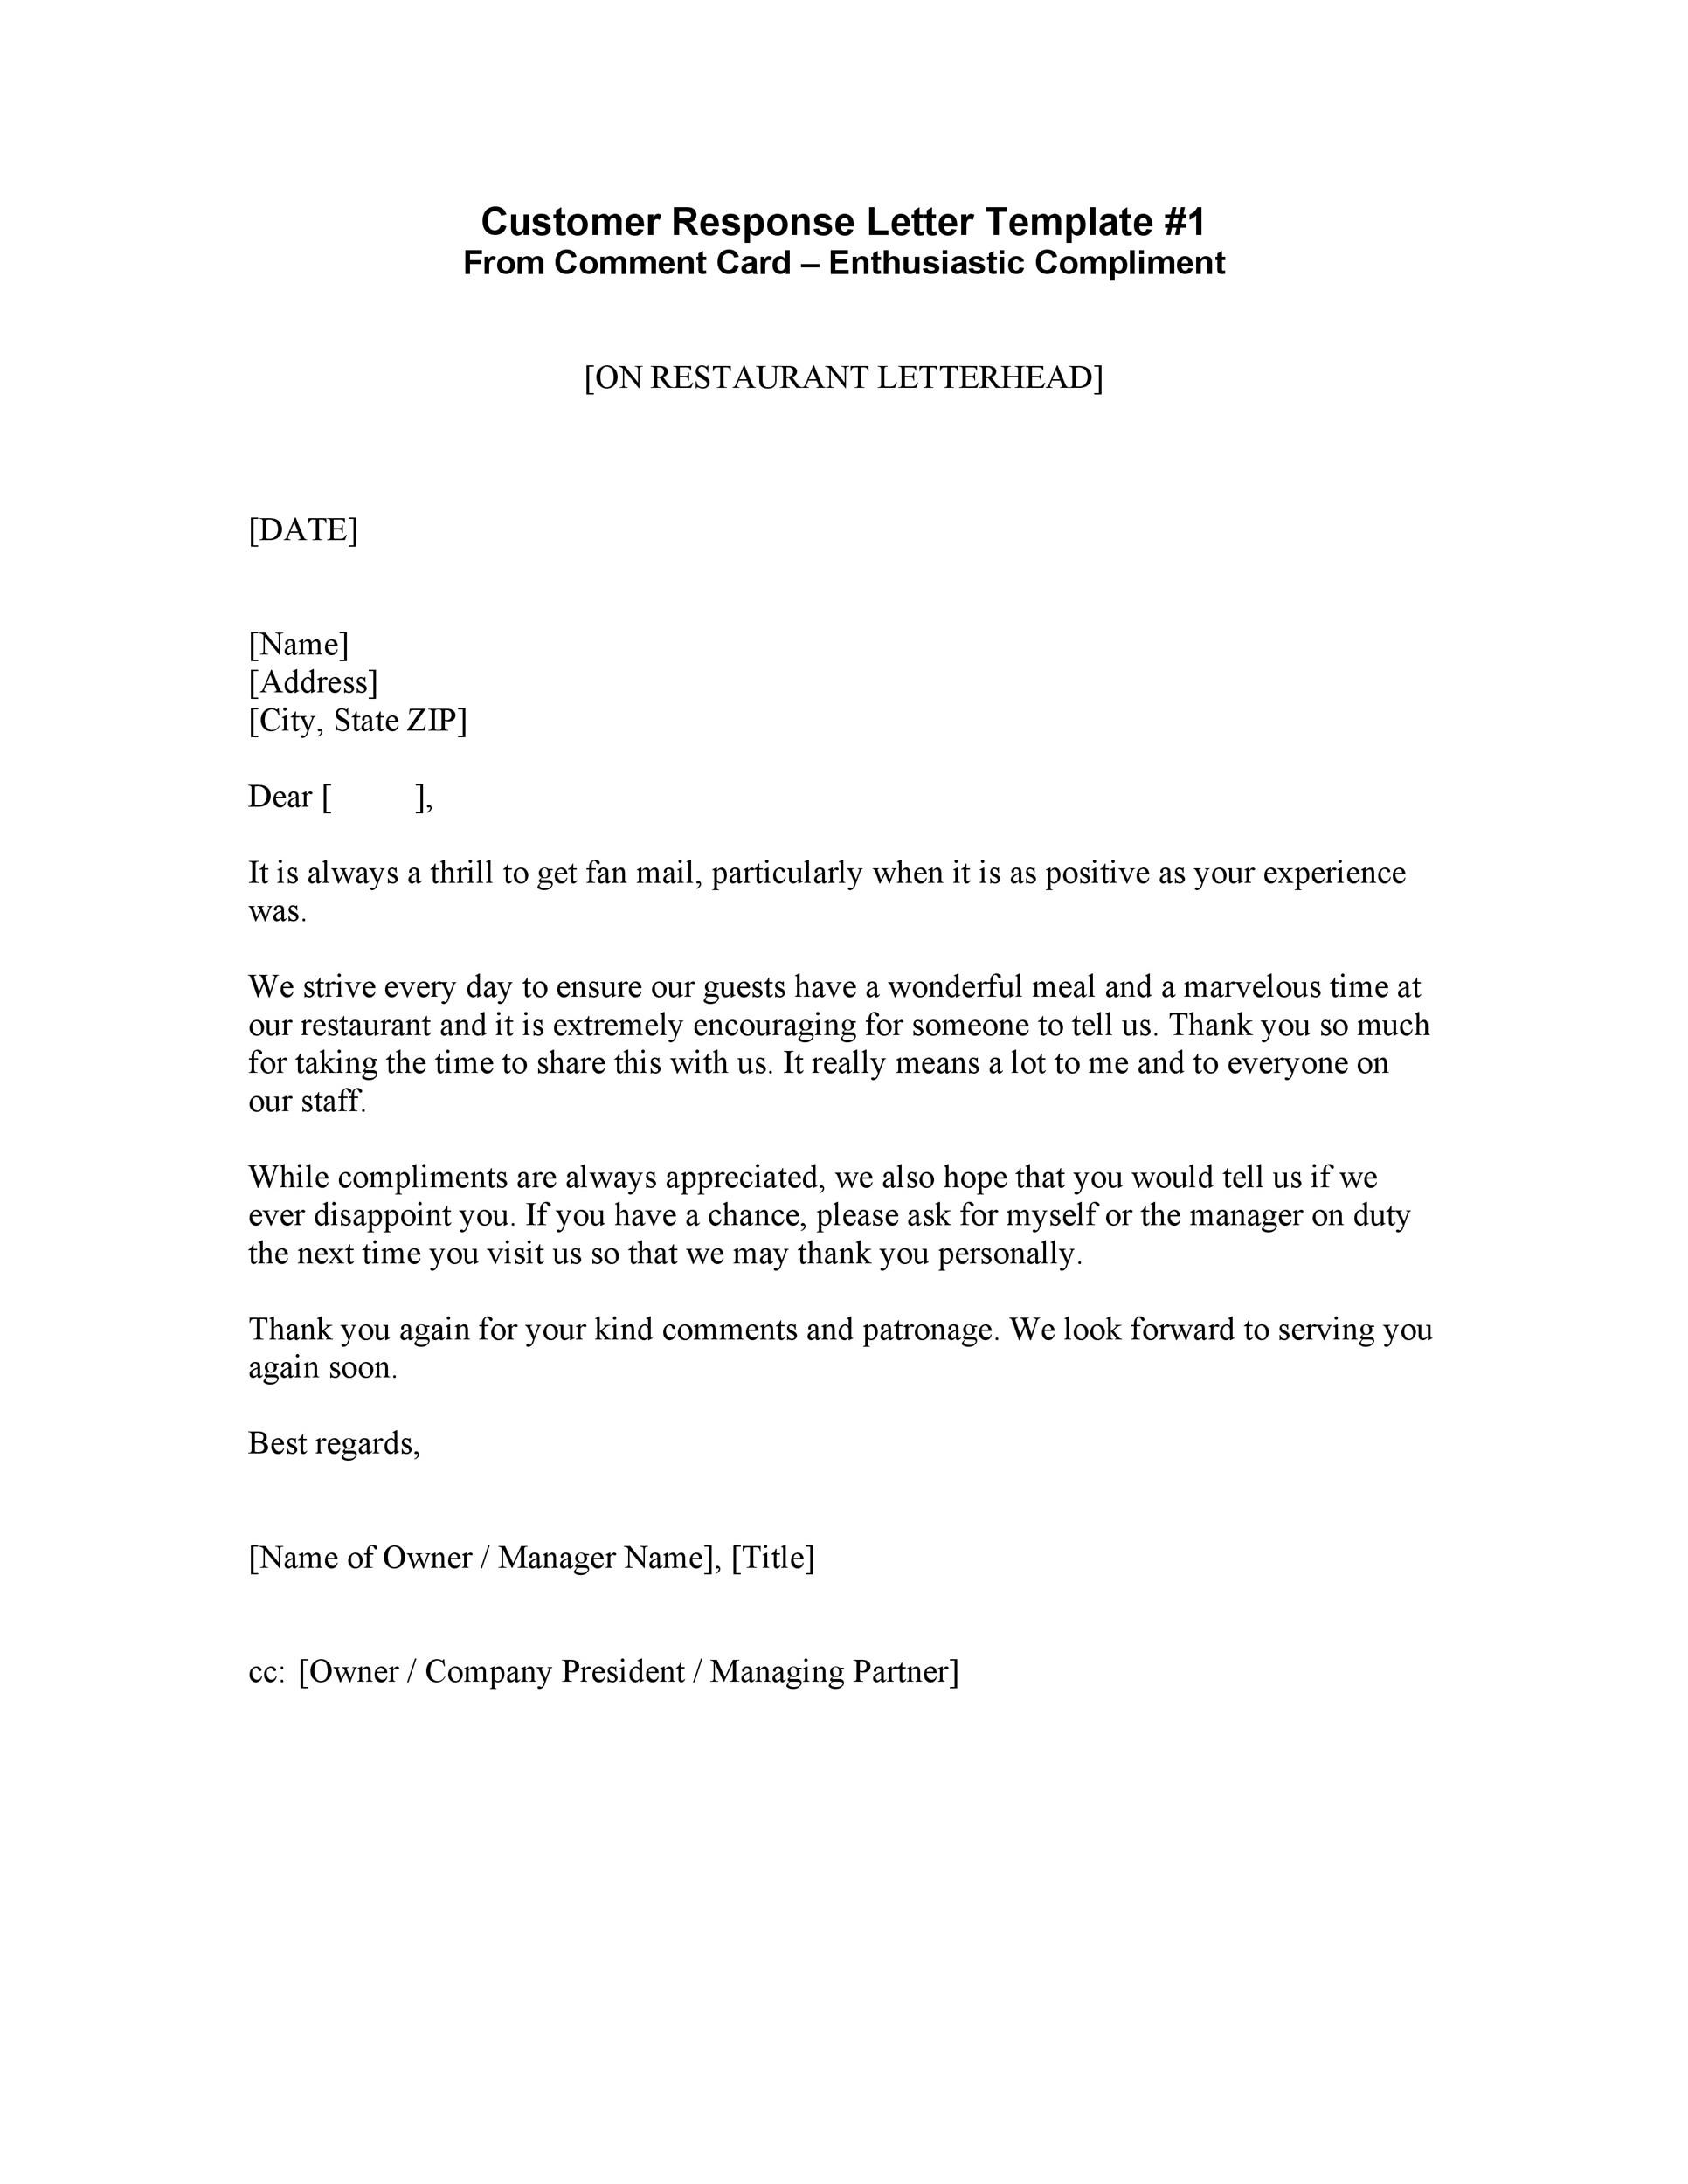 48-useful-apology-letter-templates-sorry-letter-samples